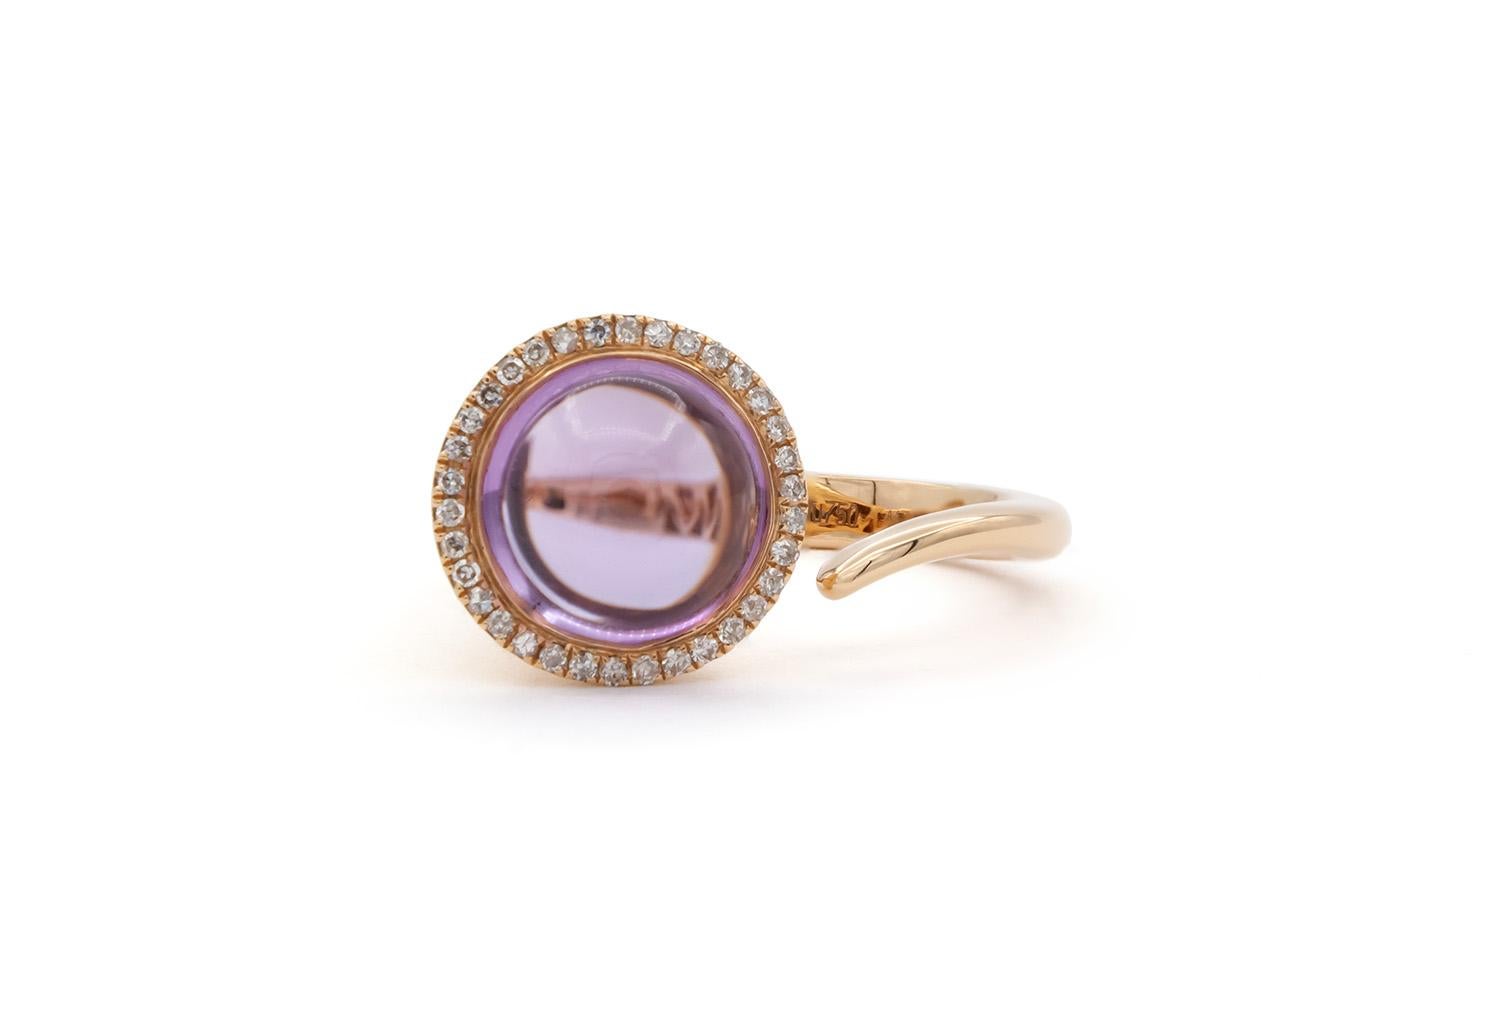 We are pleased to offer this Brand New Unworn Forever 18k Rose Gold Purple Amethyst & Diamond Cocktail Fashion Ring. This stunning ring features a 4.04ct cabochon cut natural purple amethyst accented by 0.145ctw round brilliant cut diamonds all set